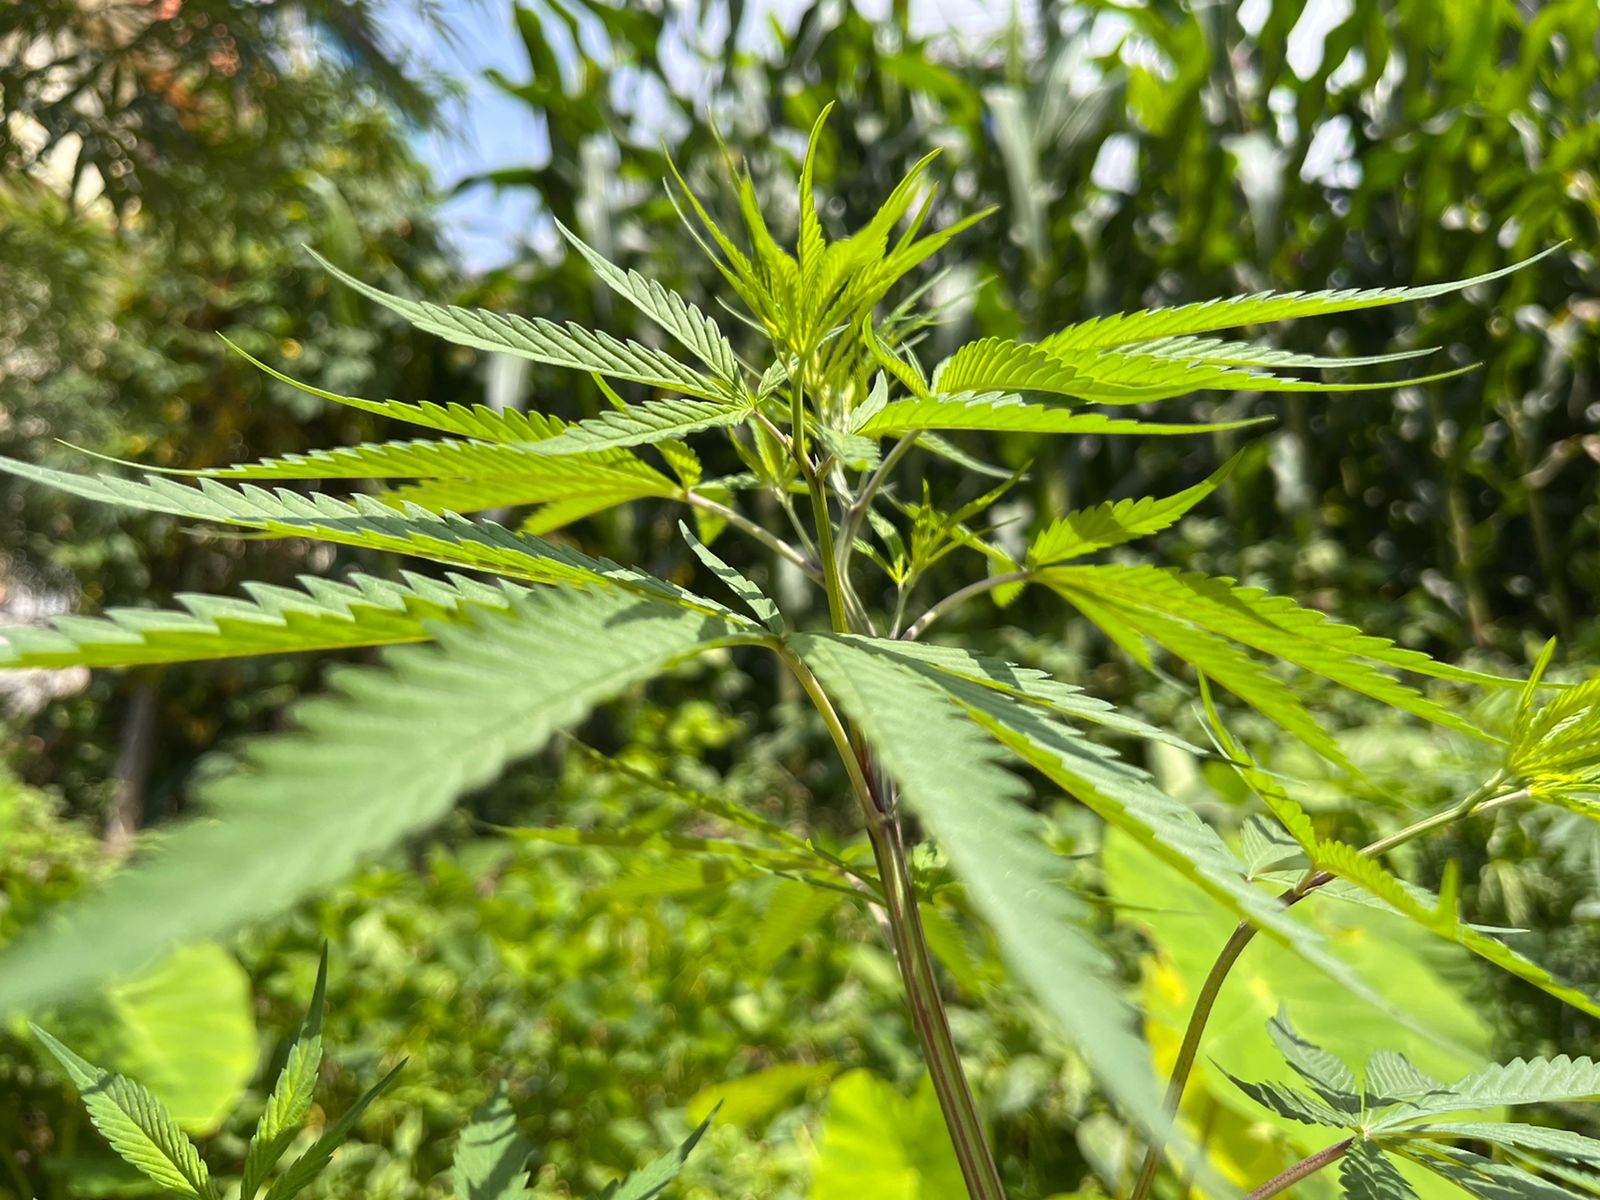 https://www.nepalminute.com/uploads/posts/Cannabis plants can easily be found growing in various locations in Nepal1657179608.jpg